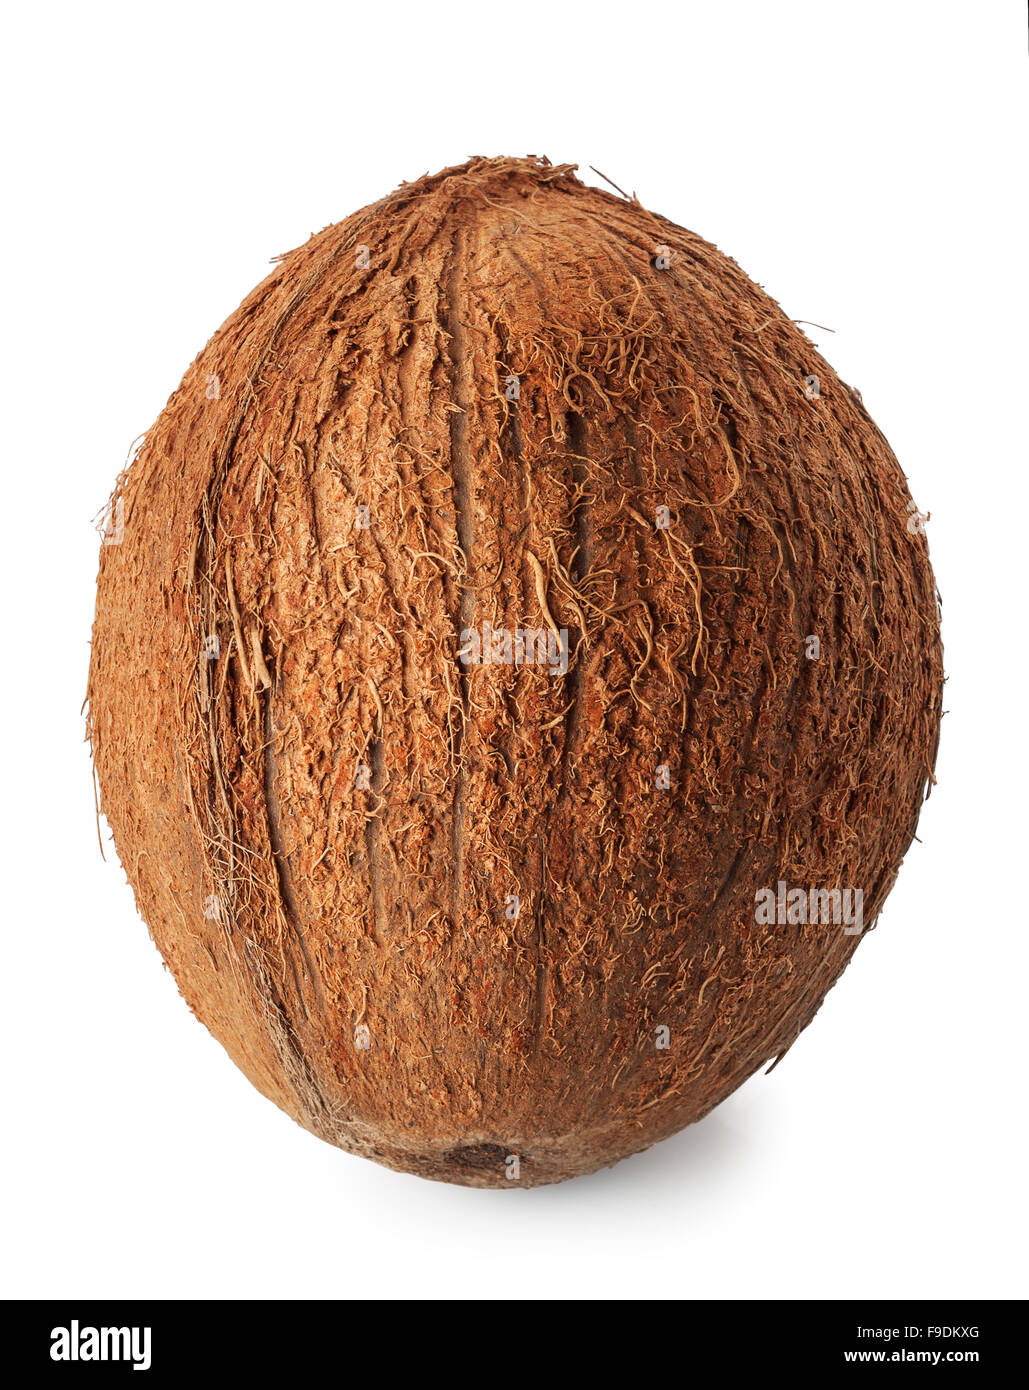 vertical image of a coconut isolate on a white background Stock Photo